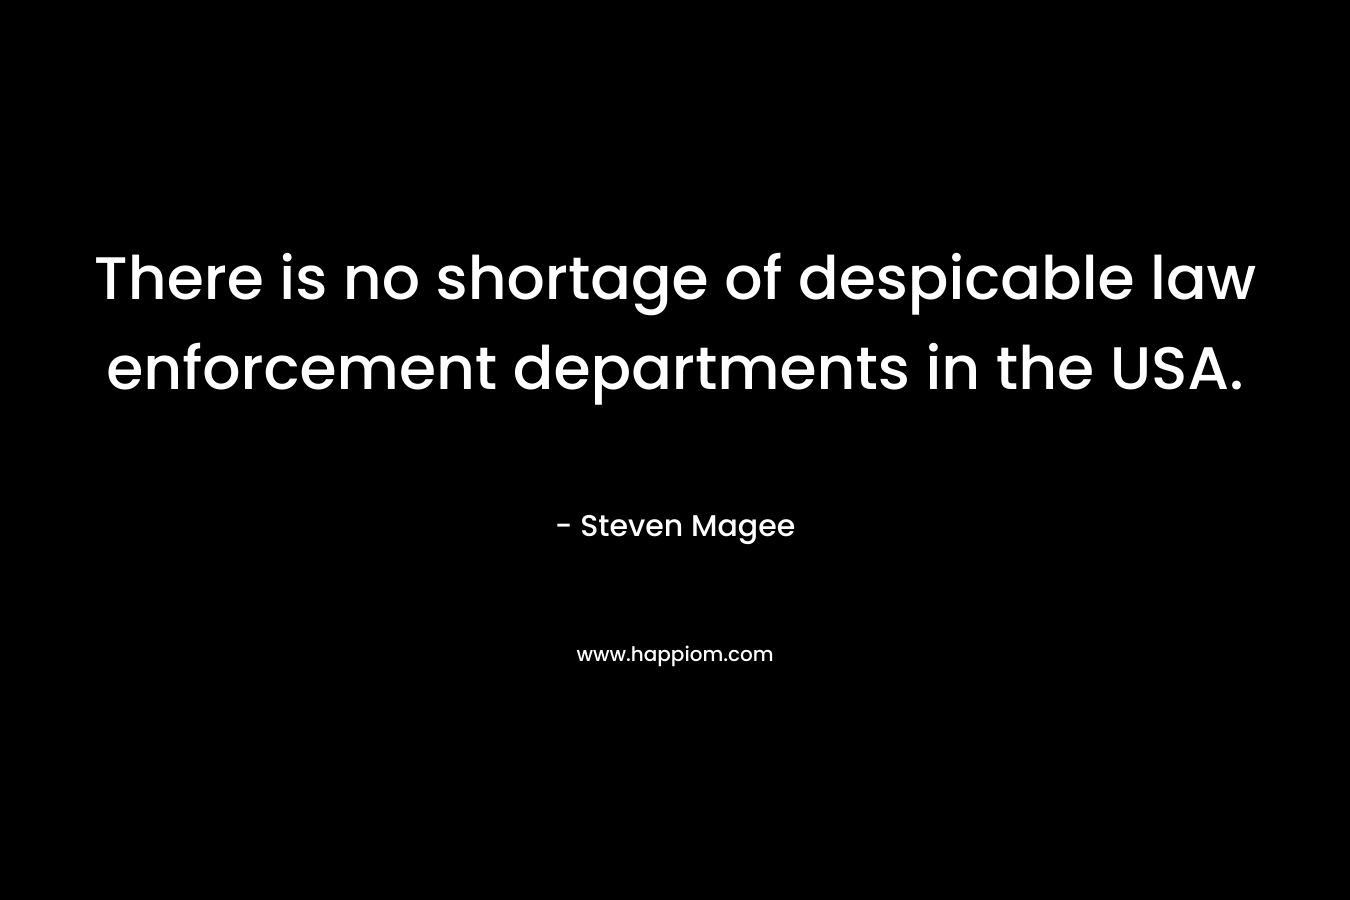 There is no shortage of despicable law enforcement departments in the USA. – Steven Magee